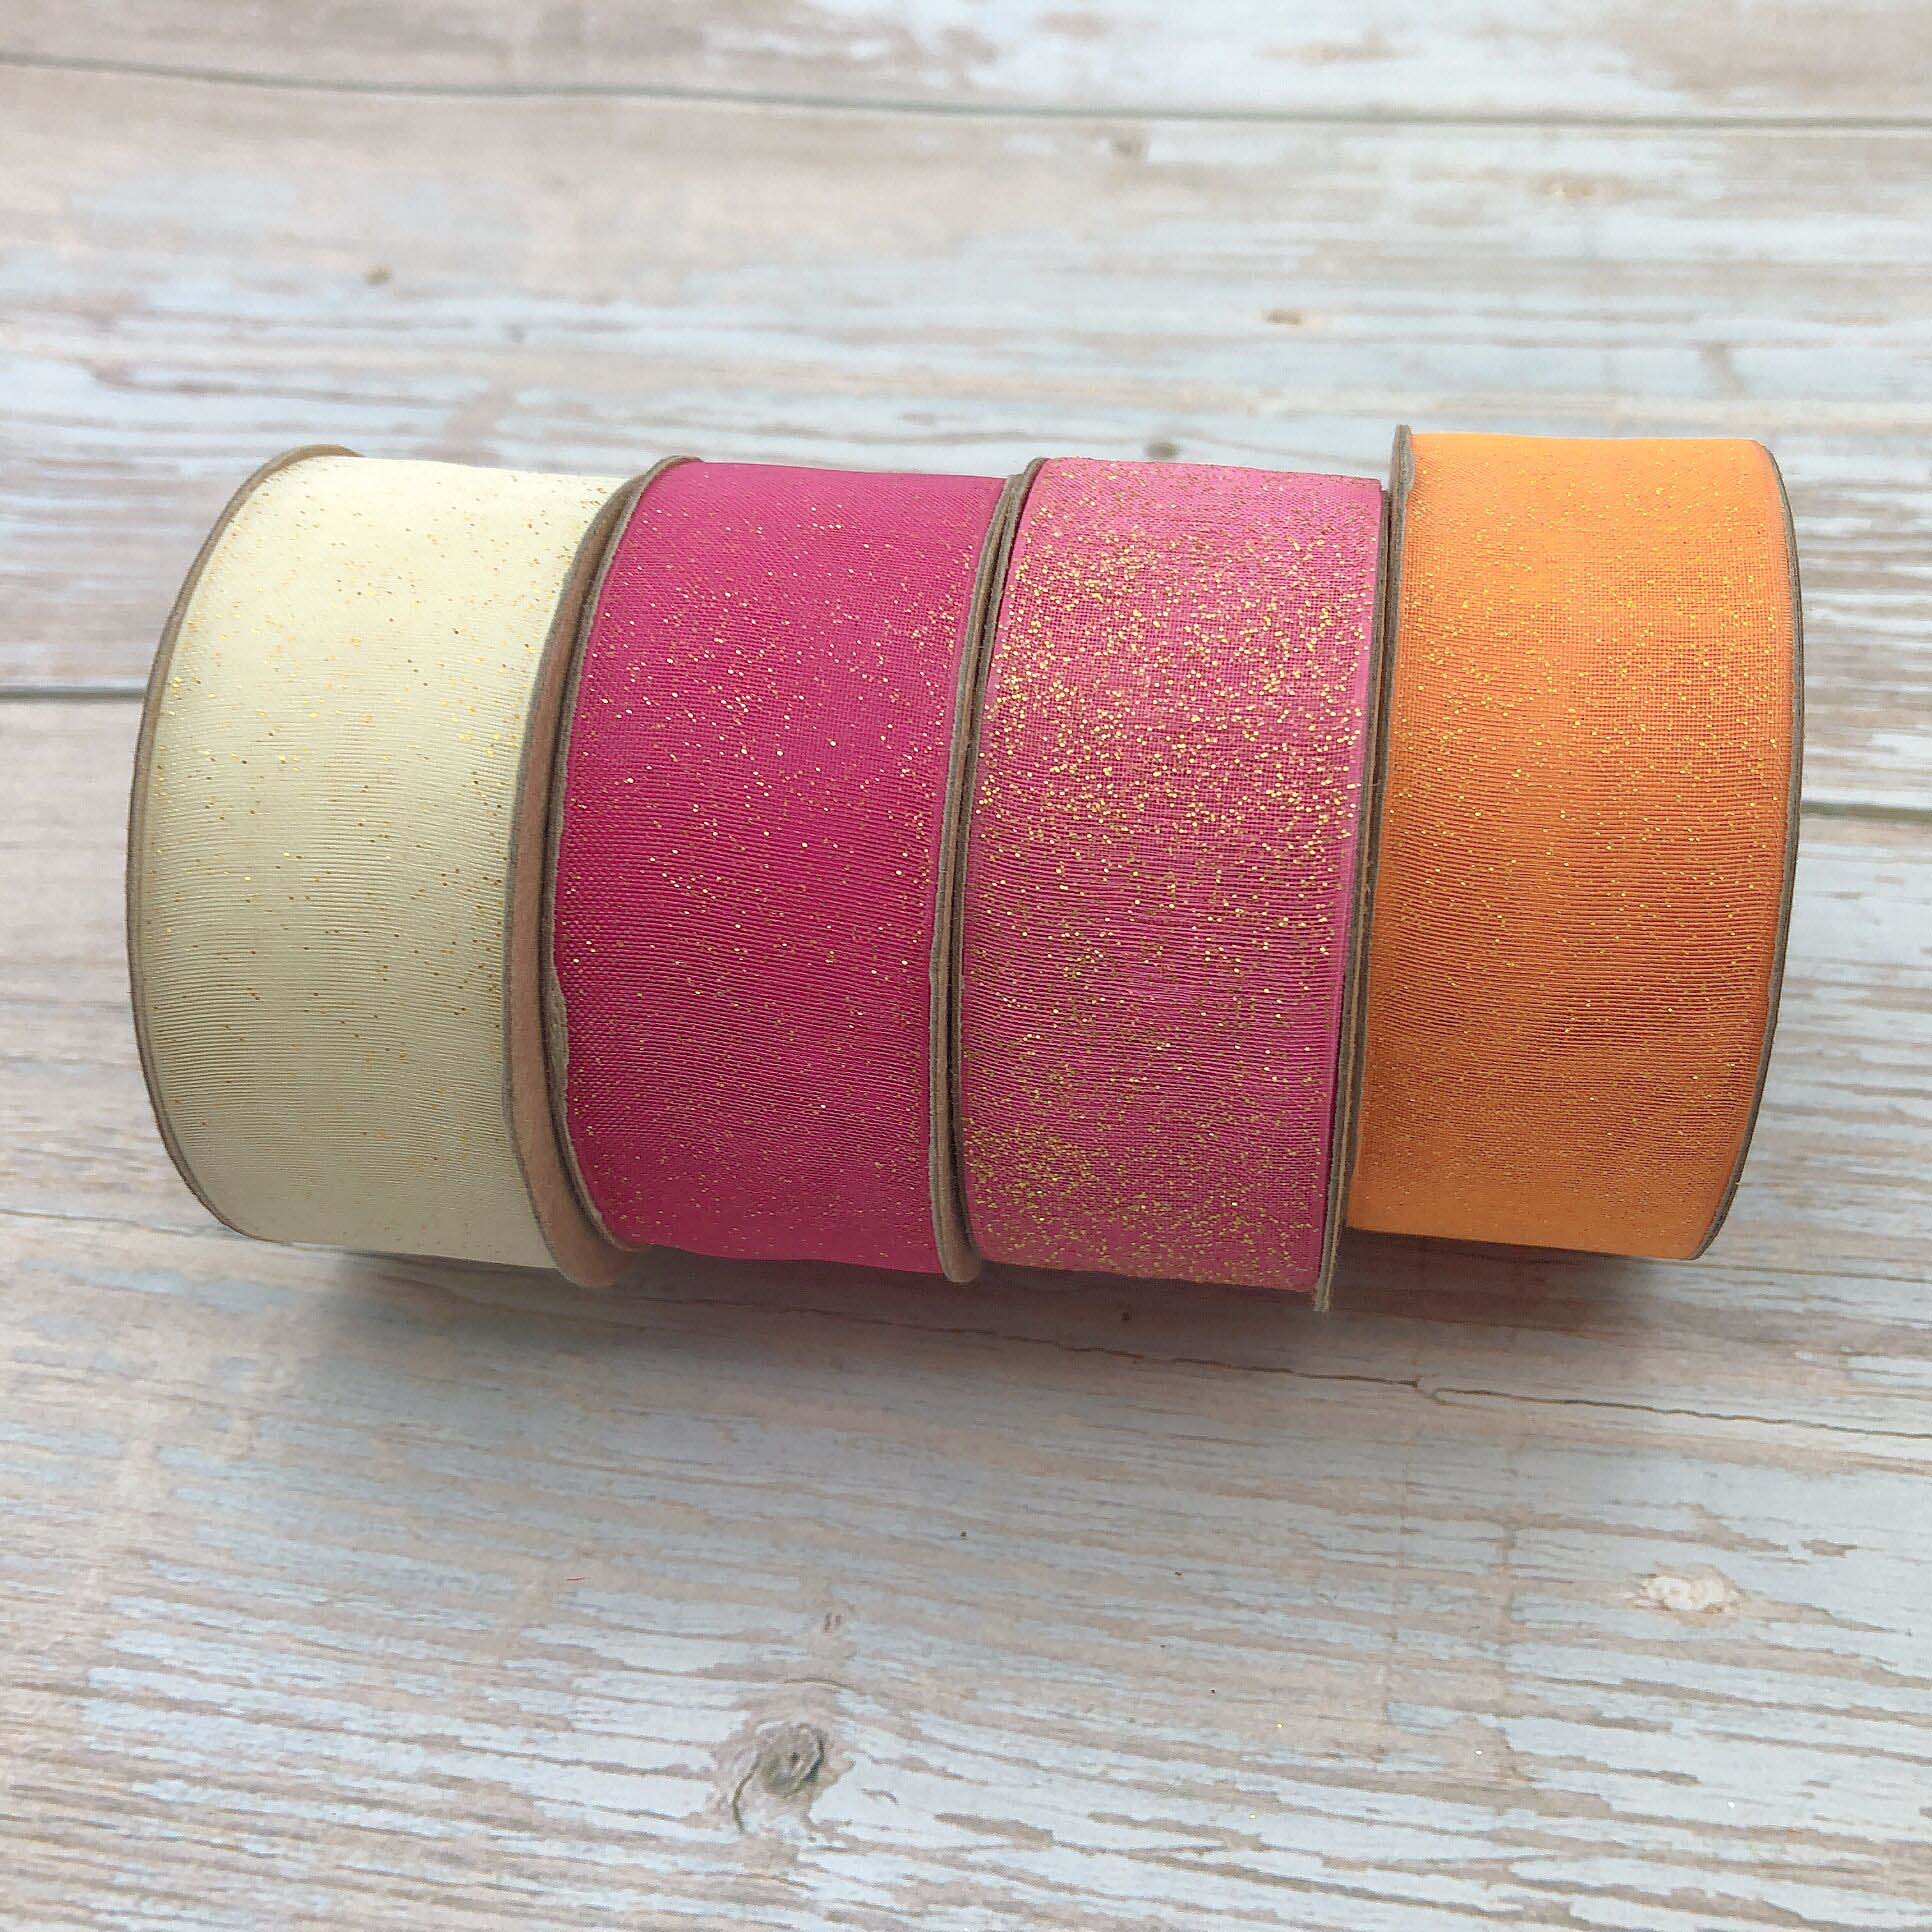 25mm Sheer Organza Ribbon Sprinkled With Gold Glitter